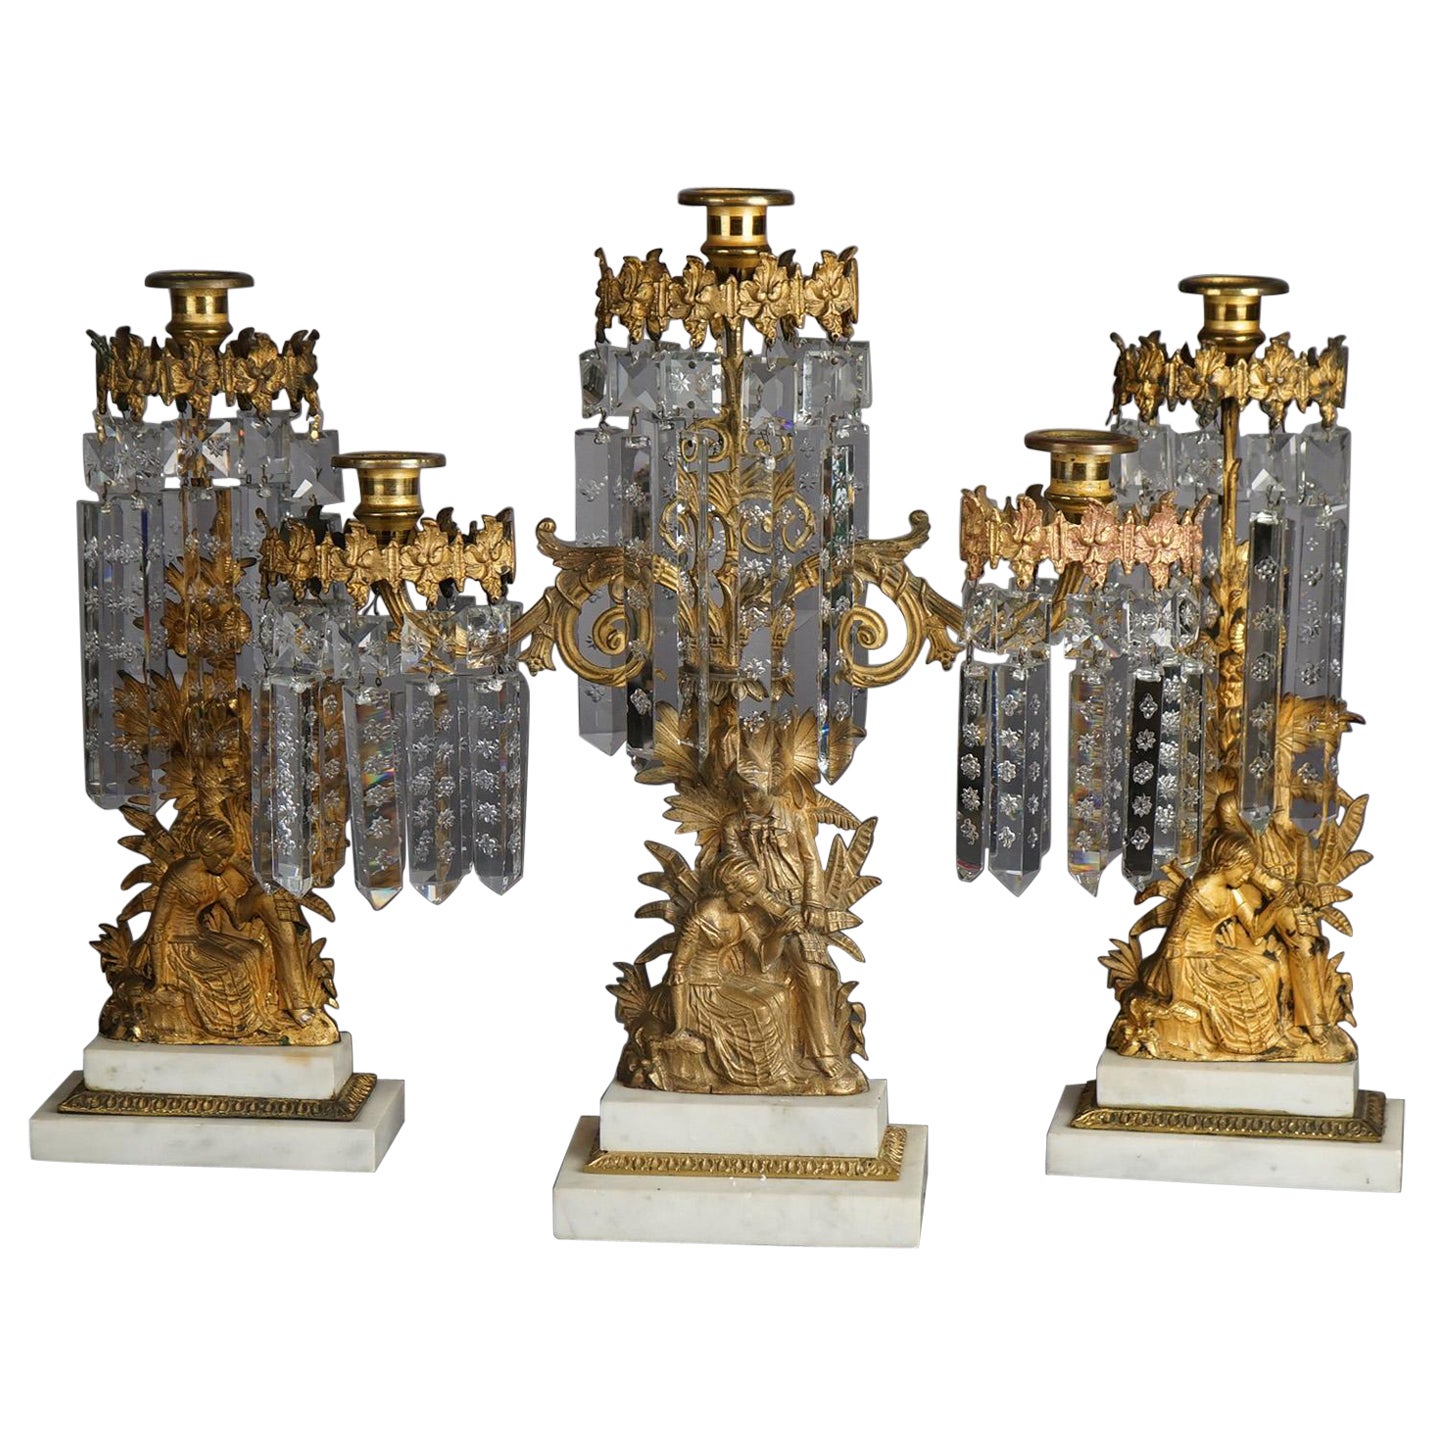 Antique Gilt Bronze American Girandole Candelabras with Marble & Crystals C1880 For Sale